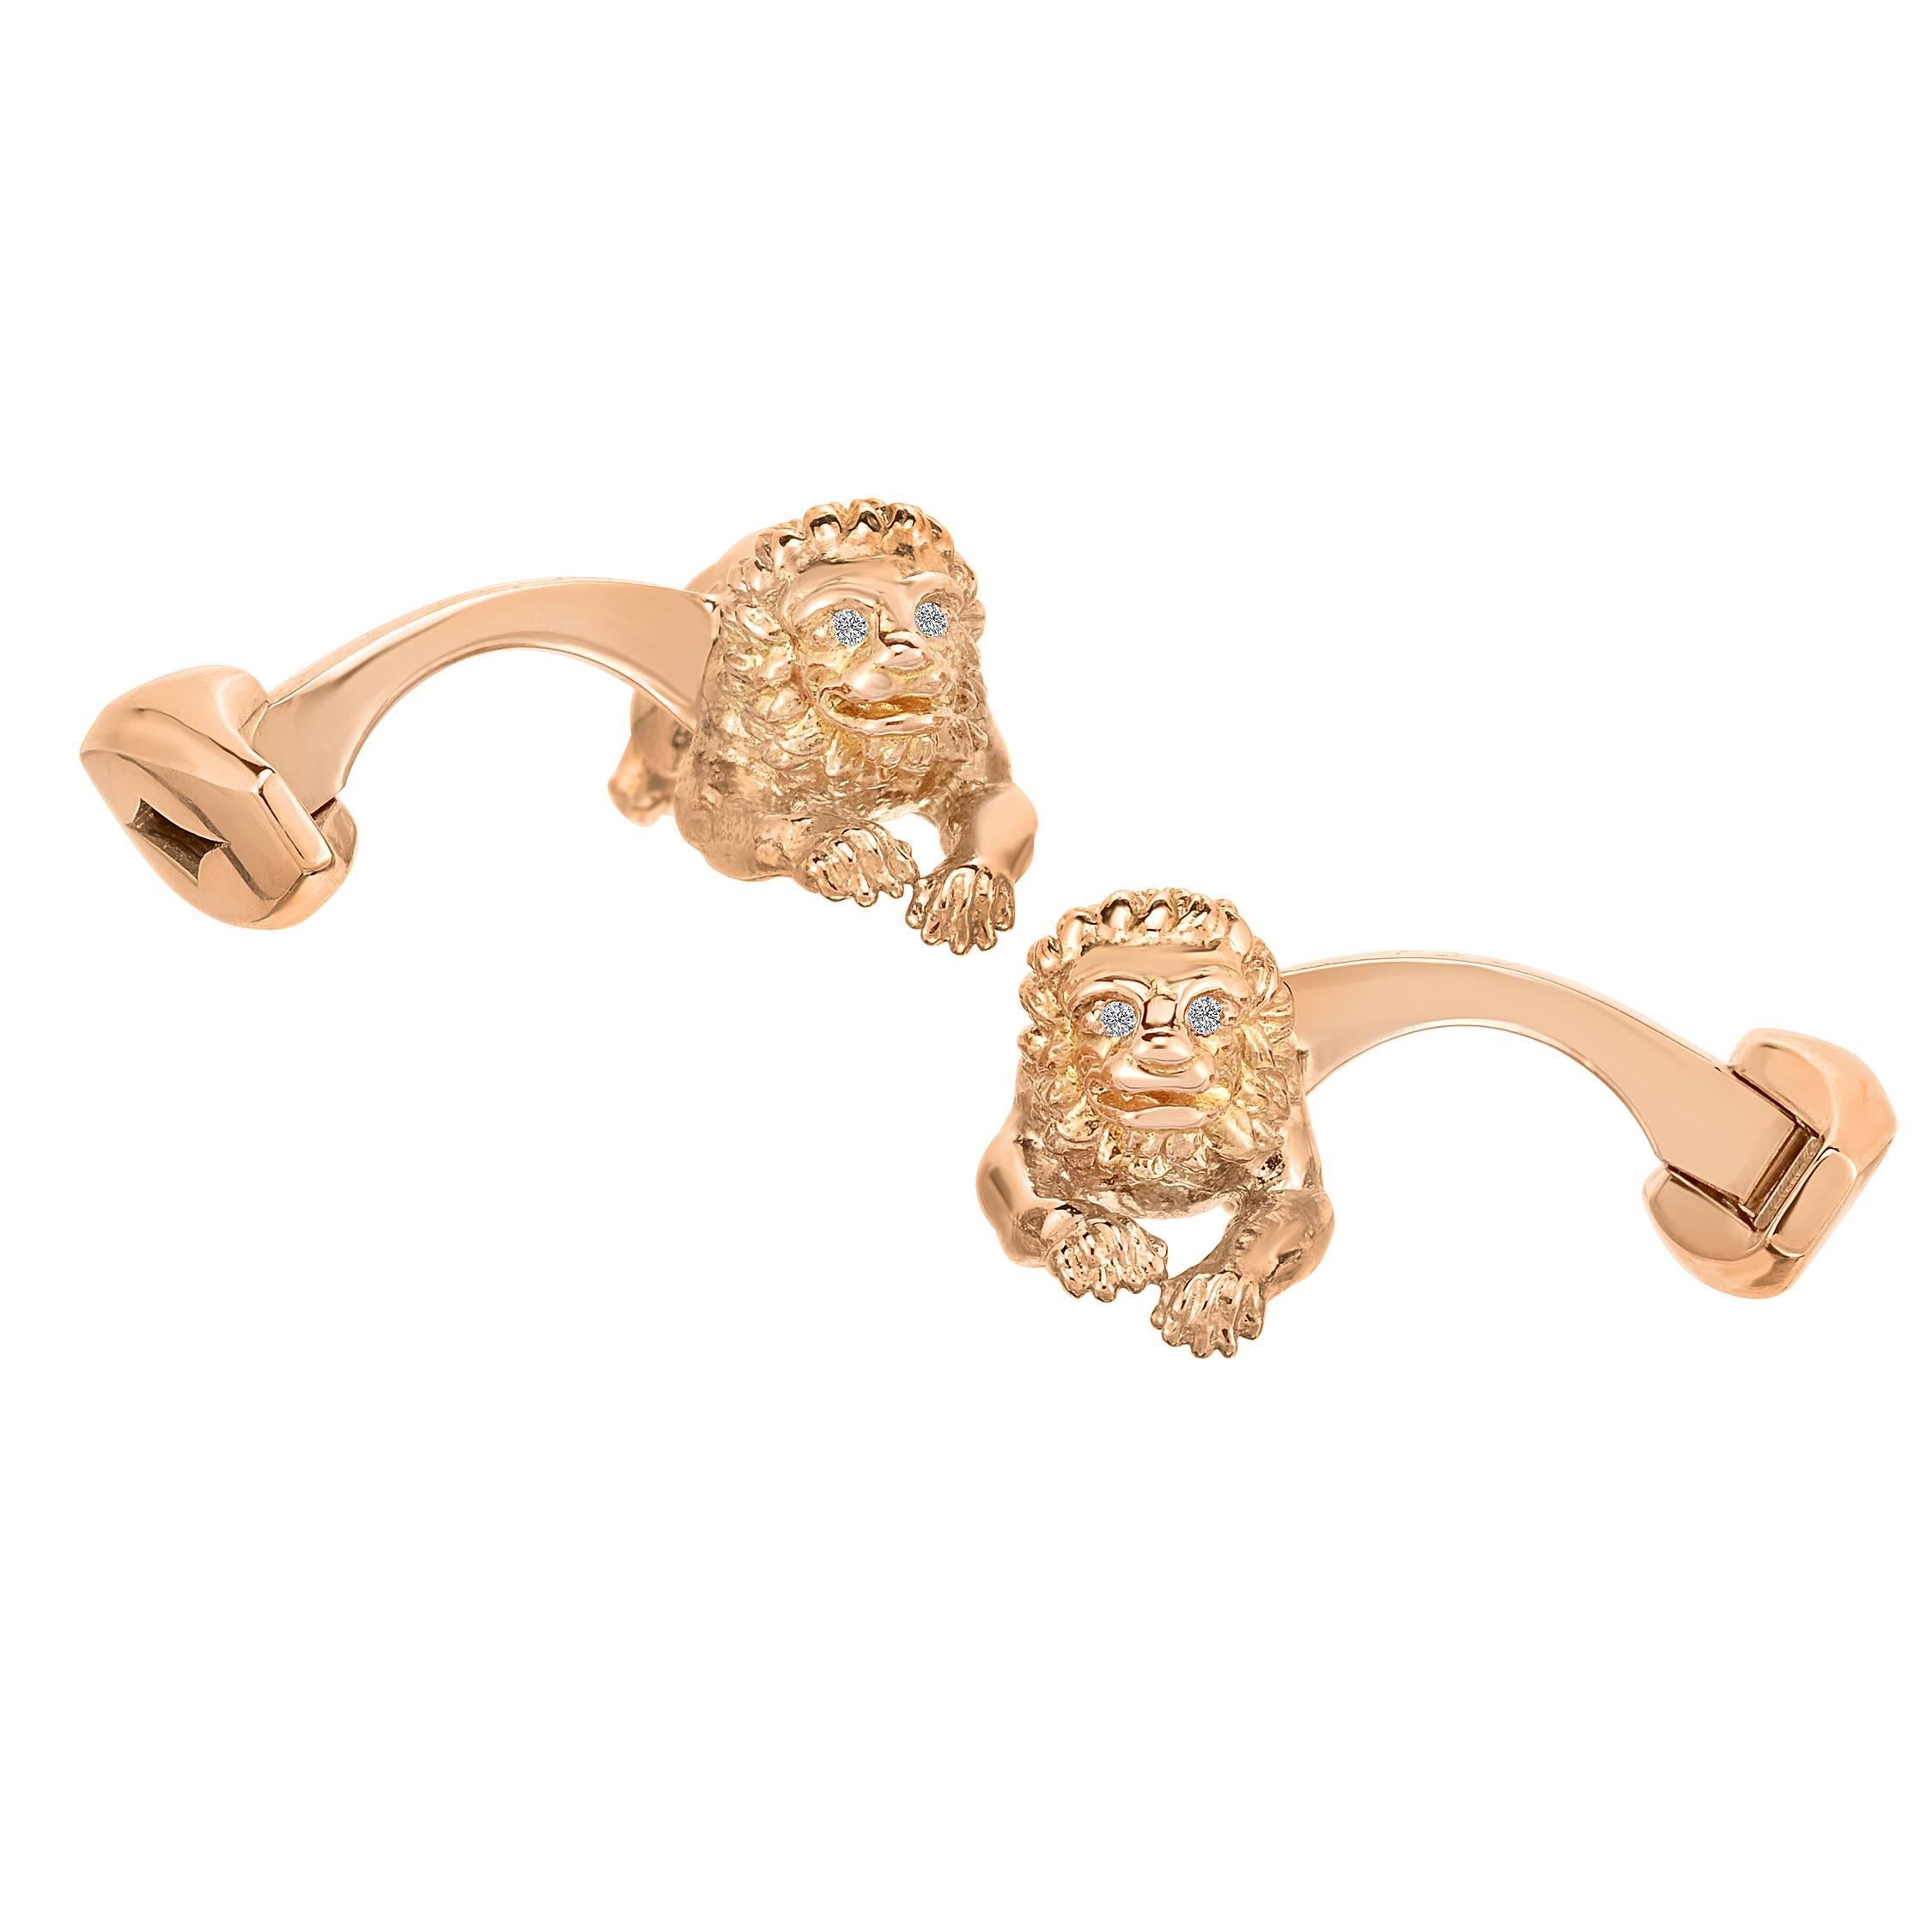 Marisa Perry's Rose Gold and Diamond Lion Cufflinks For Sale